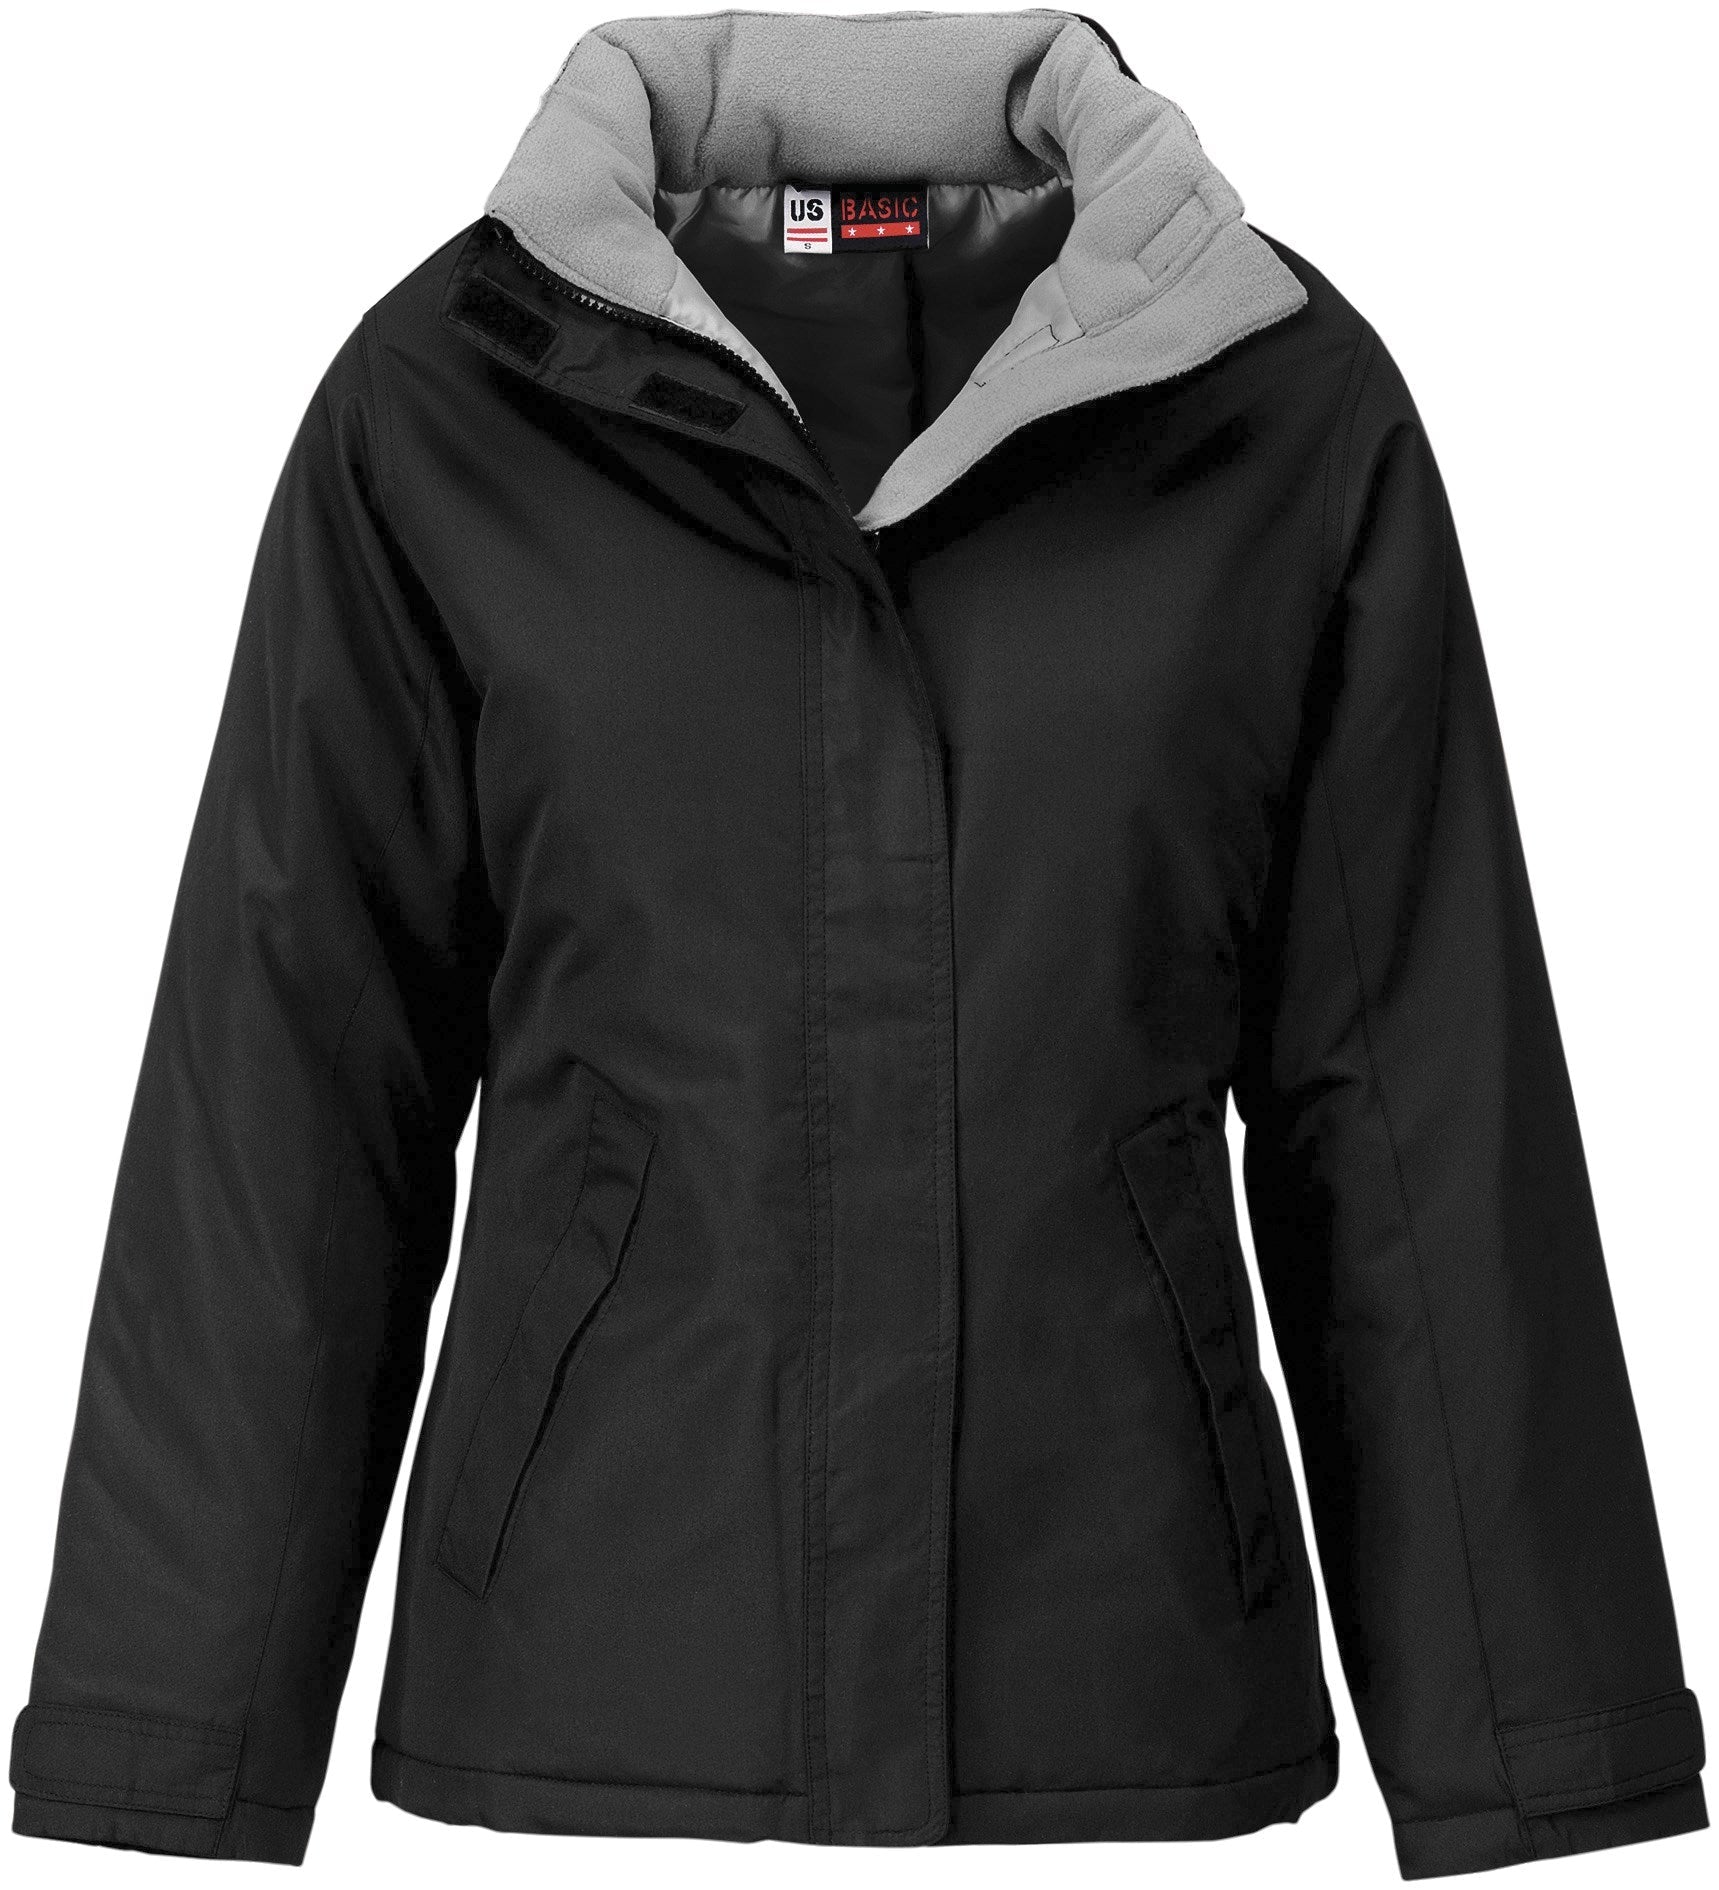 Ladies Hastings Parka - Red Only-L-Black-BL